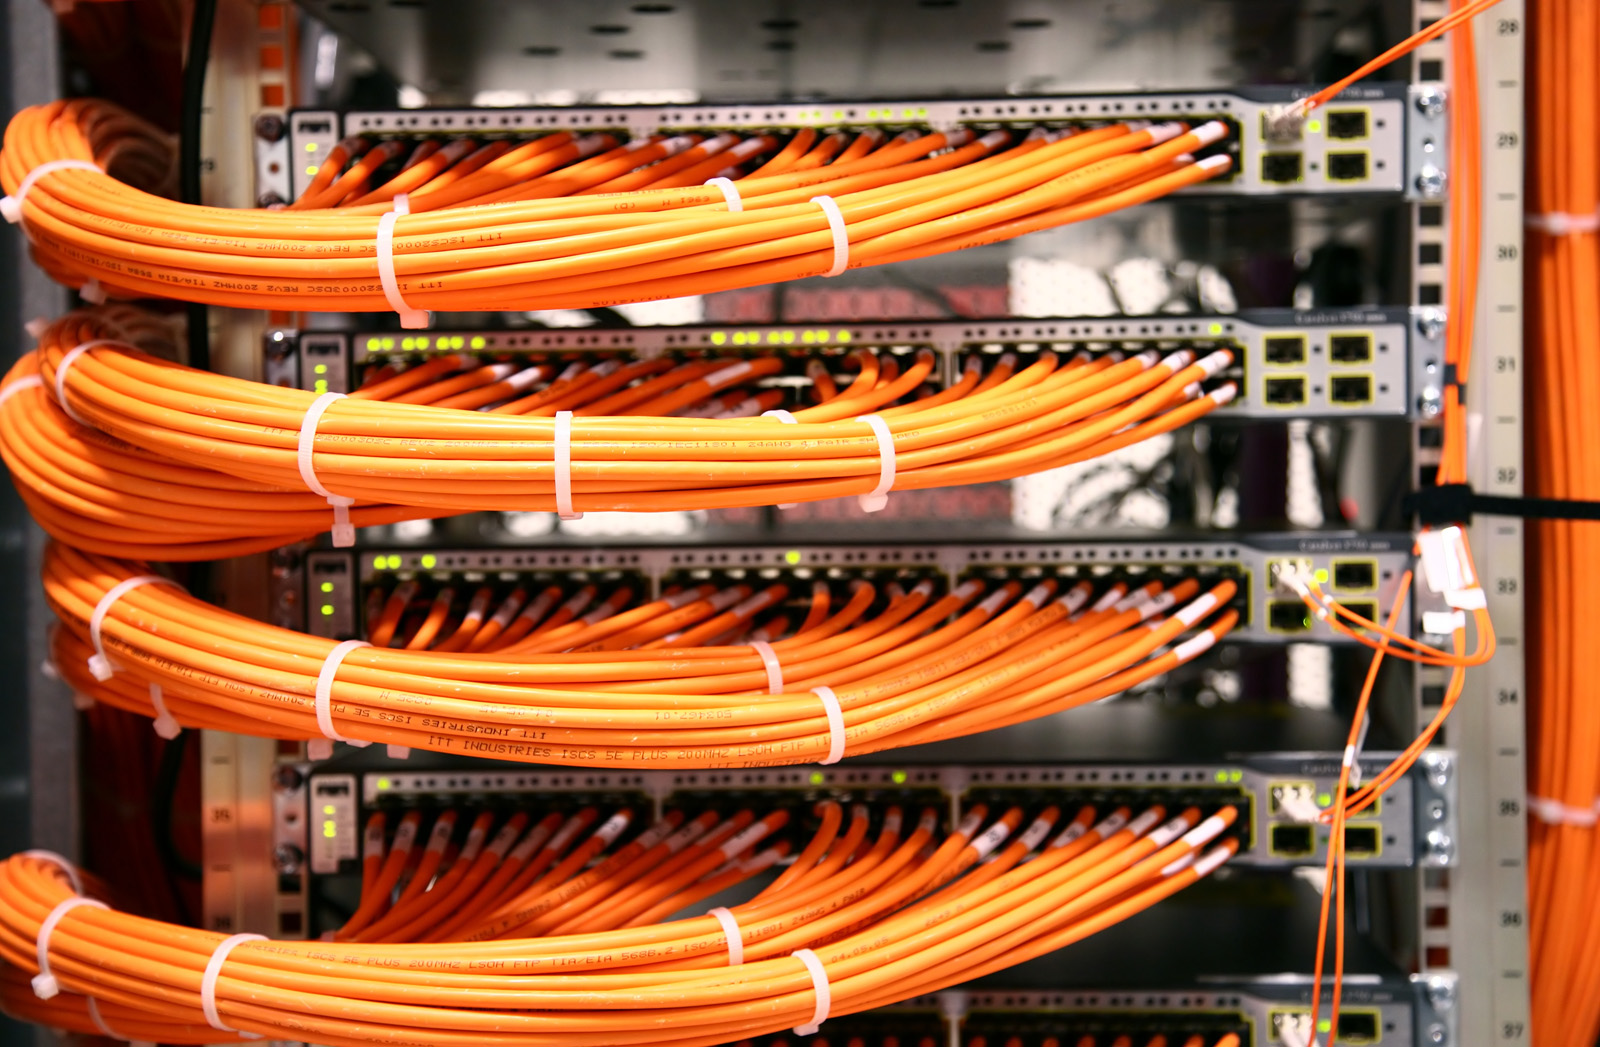 Union Kentucky Preferred Voice & Data Network Cabling Contractor